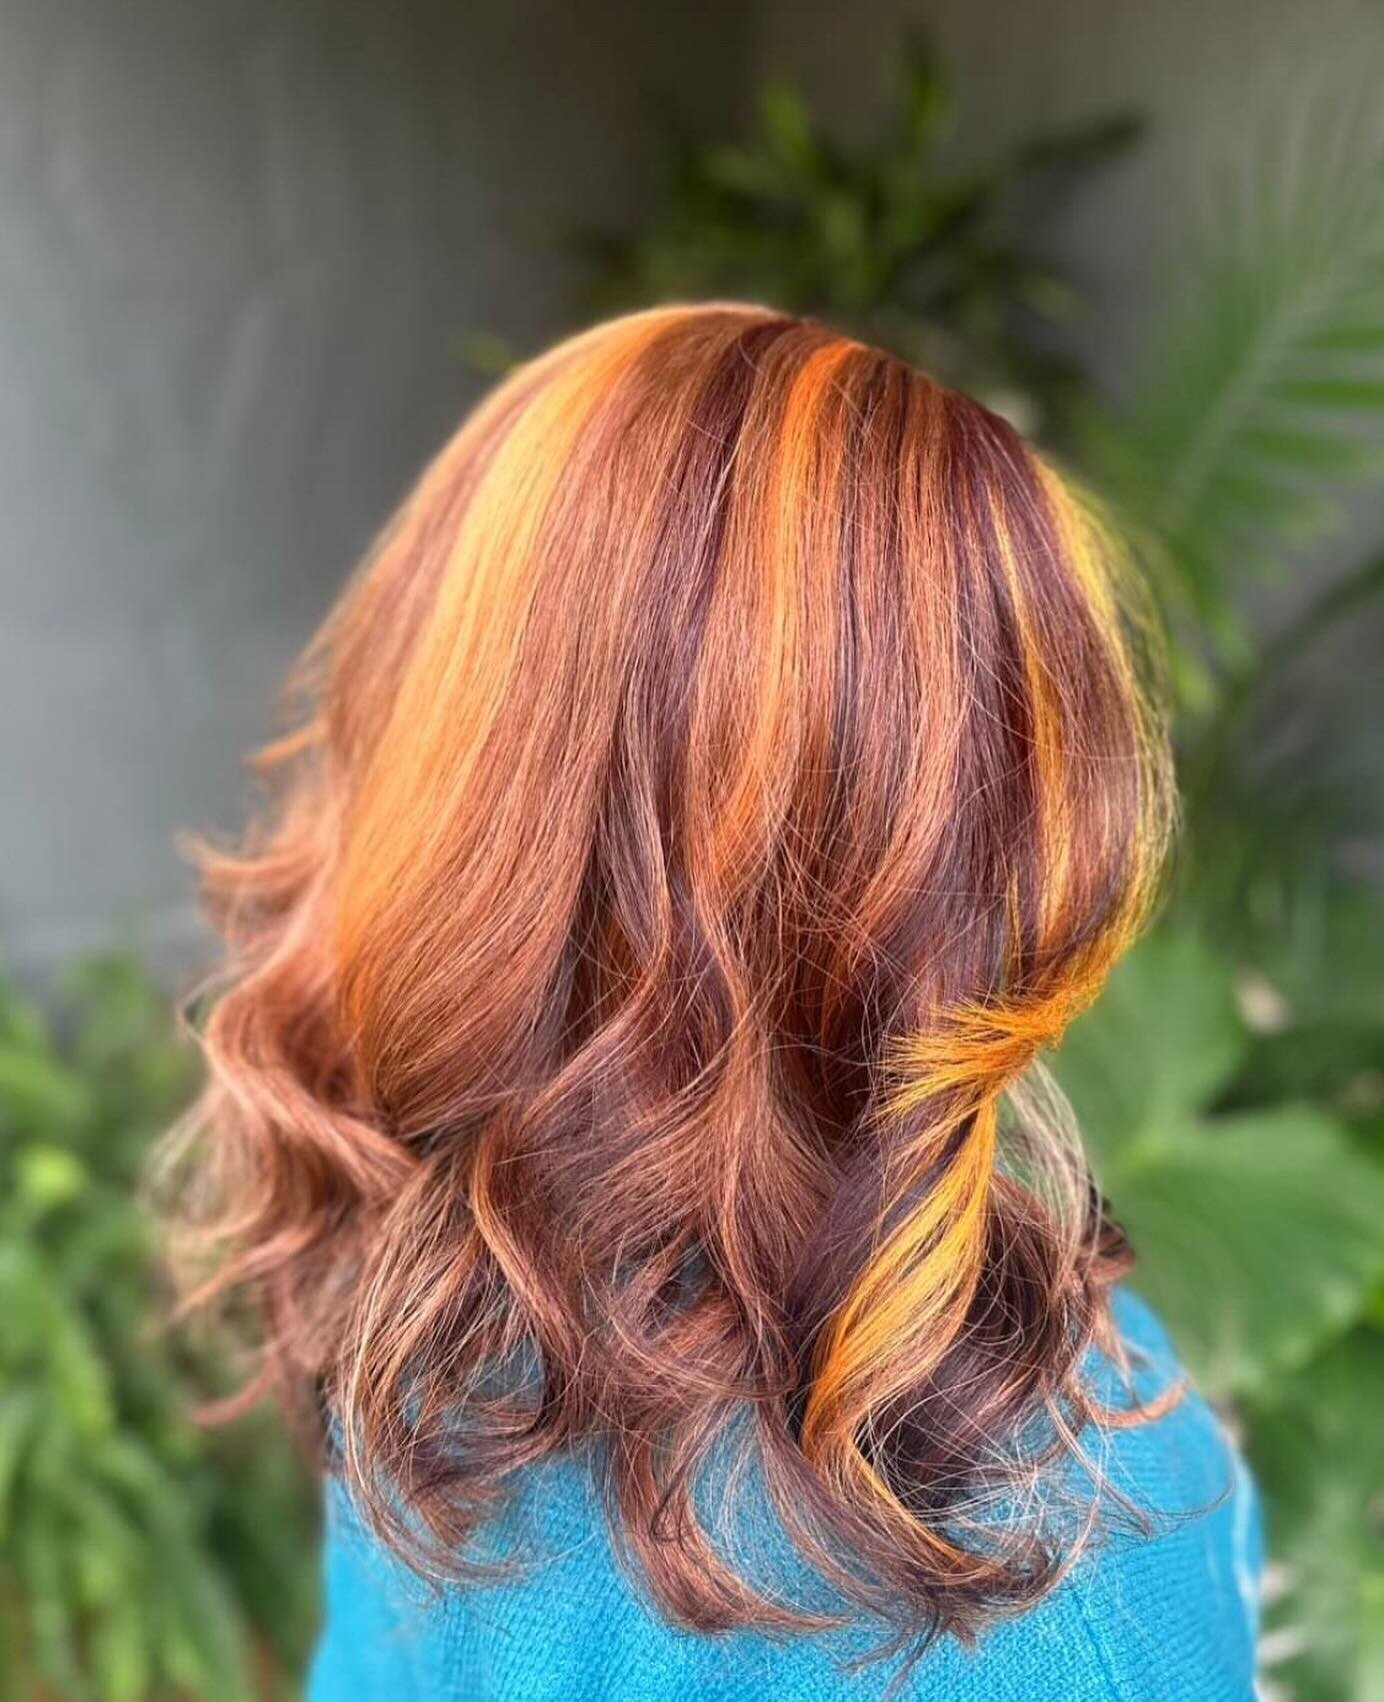 🍁 Vivid Autumn 🍁
Neon Vivid Spice Latte color creation by Nina!
Who&rsquo;s next for bold Fall color?
⠀⠀⠀⠀⠀⠀⠀⠀⠀
Show @ninabonitasbeauty some love give her a follow!
Make an appointment online at www.hairandco.salon
.
.
.
#pensacola #downtownpensaco